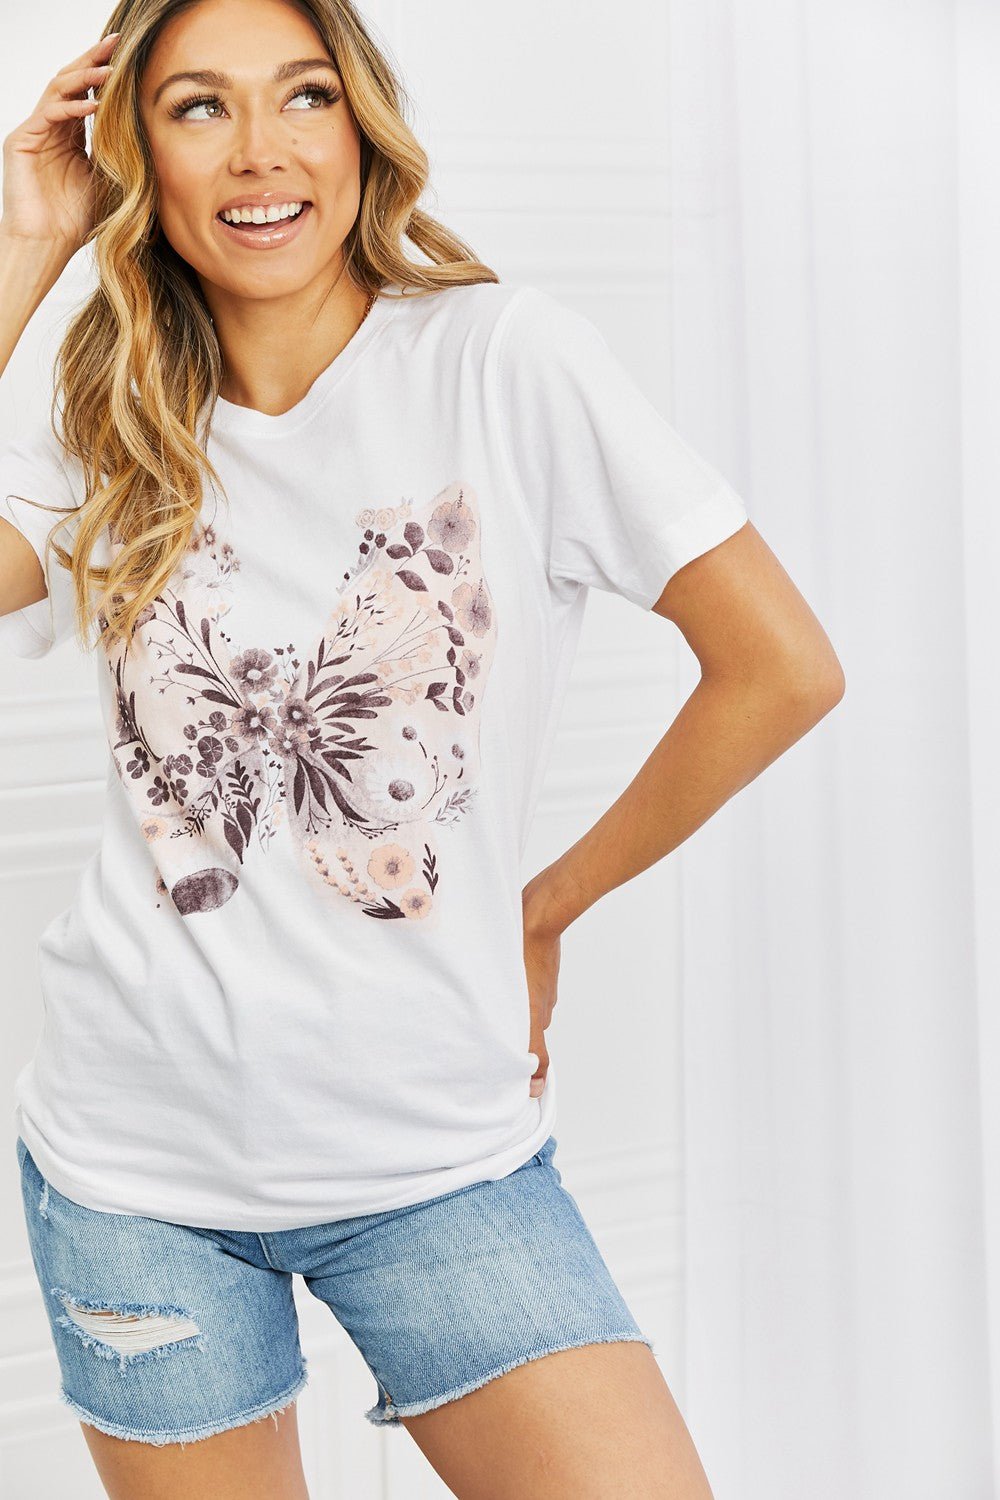 Butterfly Graphic Cotton T-Shirt in WhiteT-ShirtmineB